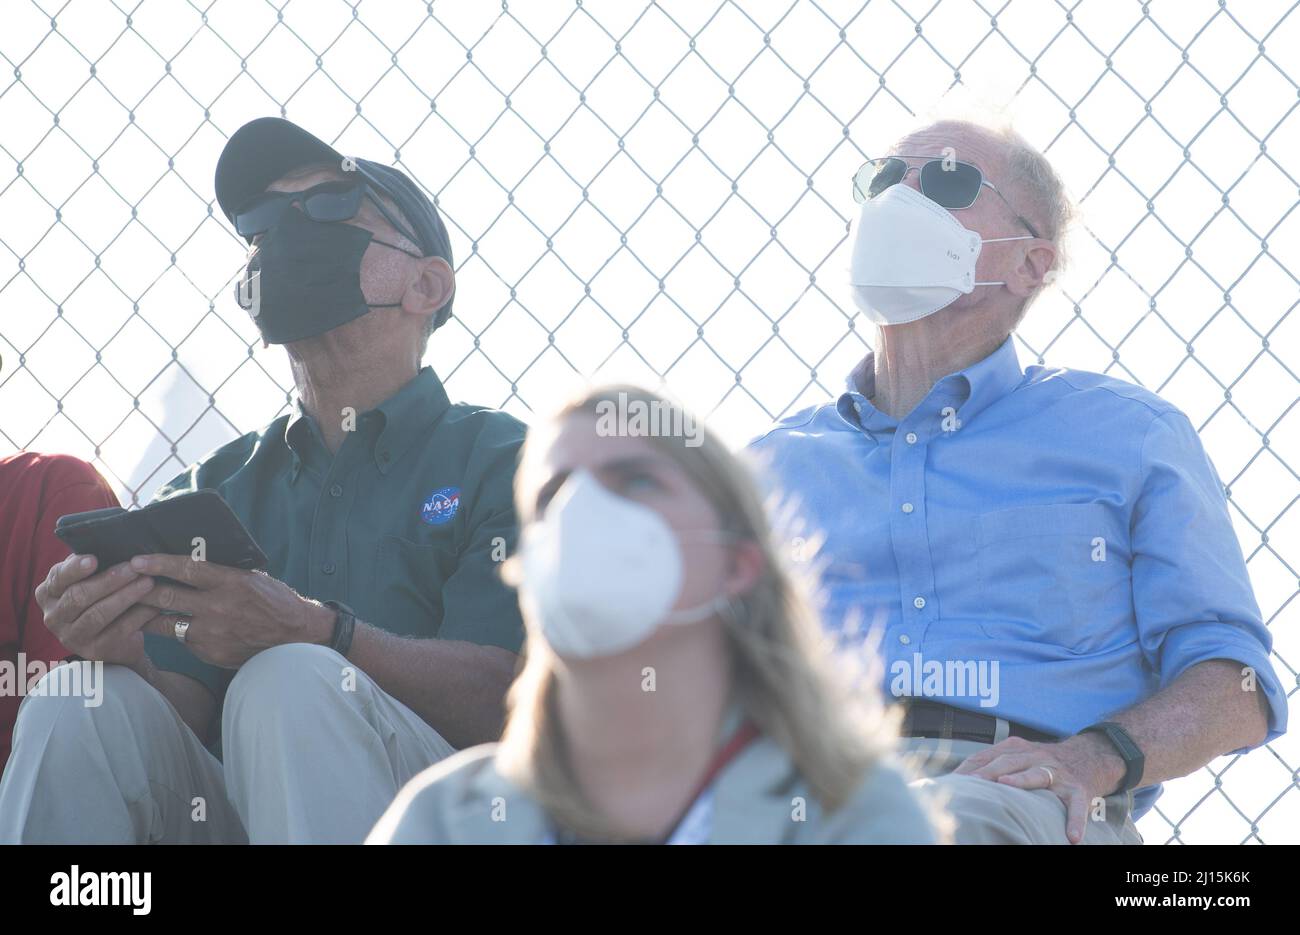 NASA Administrator Bill Nelson, right, and former NASA Administrator Charles Bolden, left, watch as a Northrop Grumman Antares rocket carrying a Cygnus resupply spacecraft launches from  Pad-0A of the Mid-Atlantic Regional Spaceport, Tuesday, Aug. 10, 2021, at NASA's Wallops Flight Facility in Virginia. Northrop Grumman’s 16th contracted cargo resupply mission with NASA will deliver nearly 8,200 pounds of science and research, crew supplies and vehicle hardware to the International Space Station and its crew.  Photo Credit: (NASA/Joel Kowsky} Stock Photo